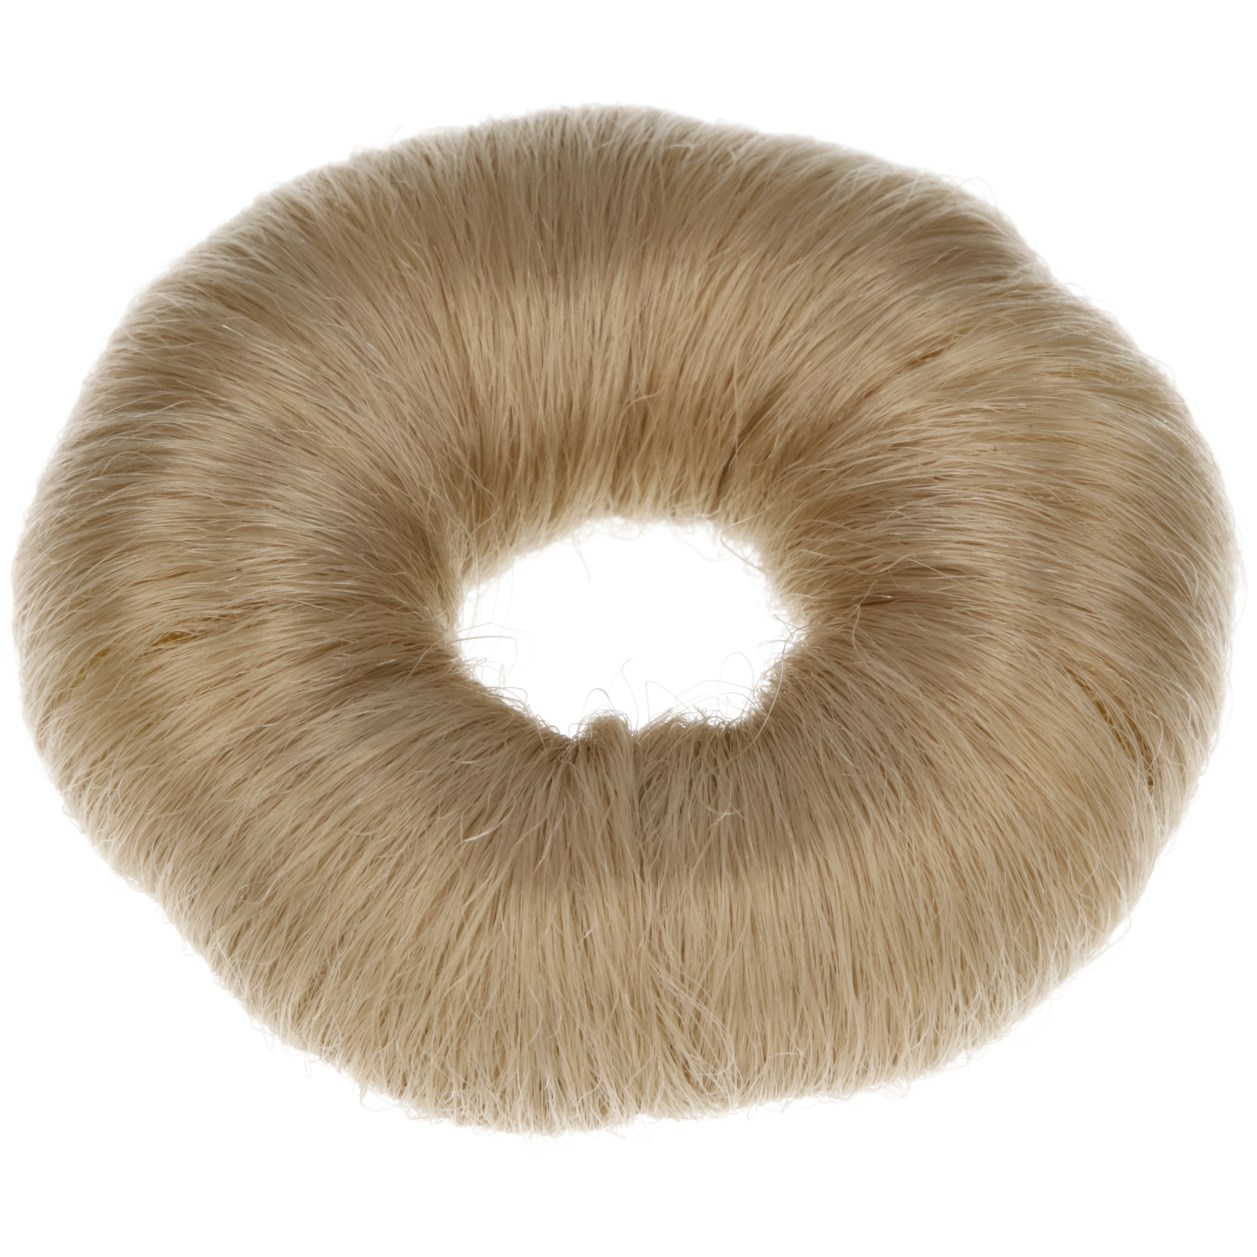 Synthetic Hair Bun Small Blond 73mm